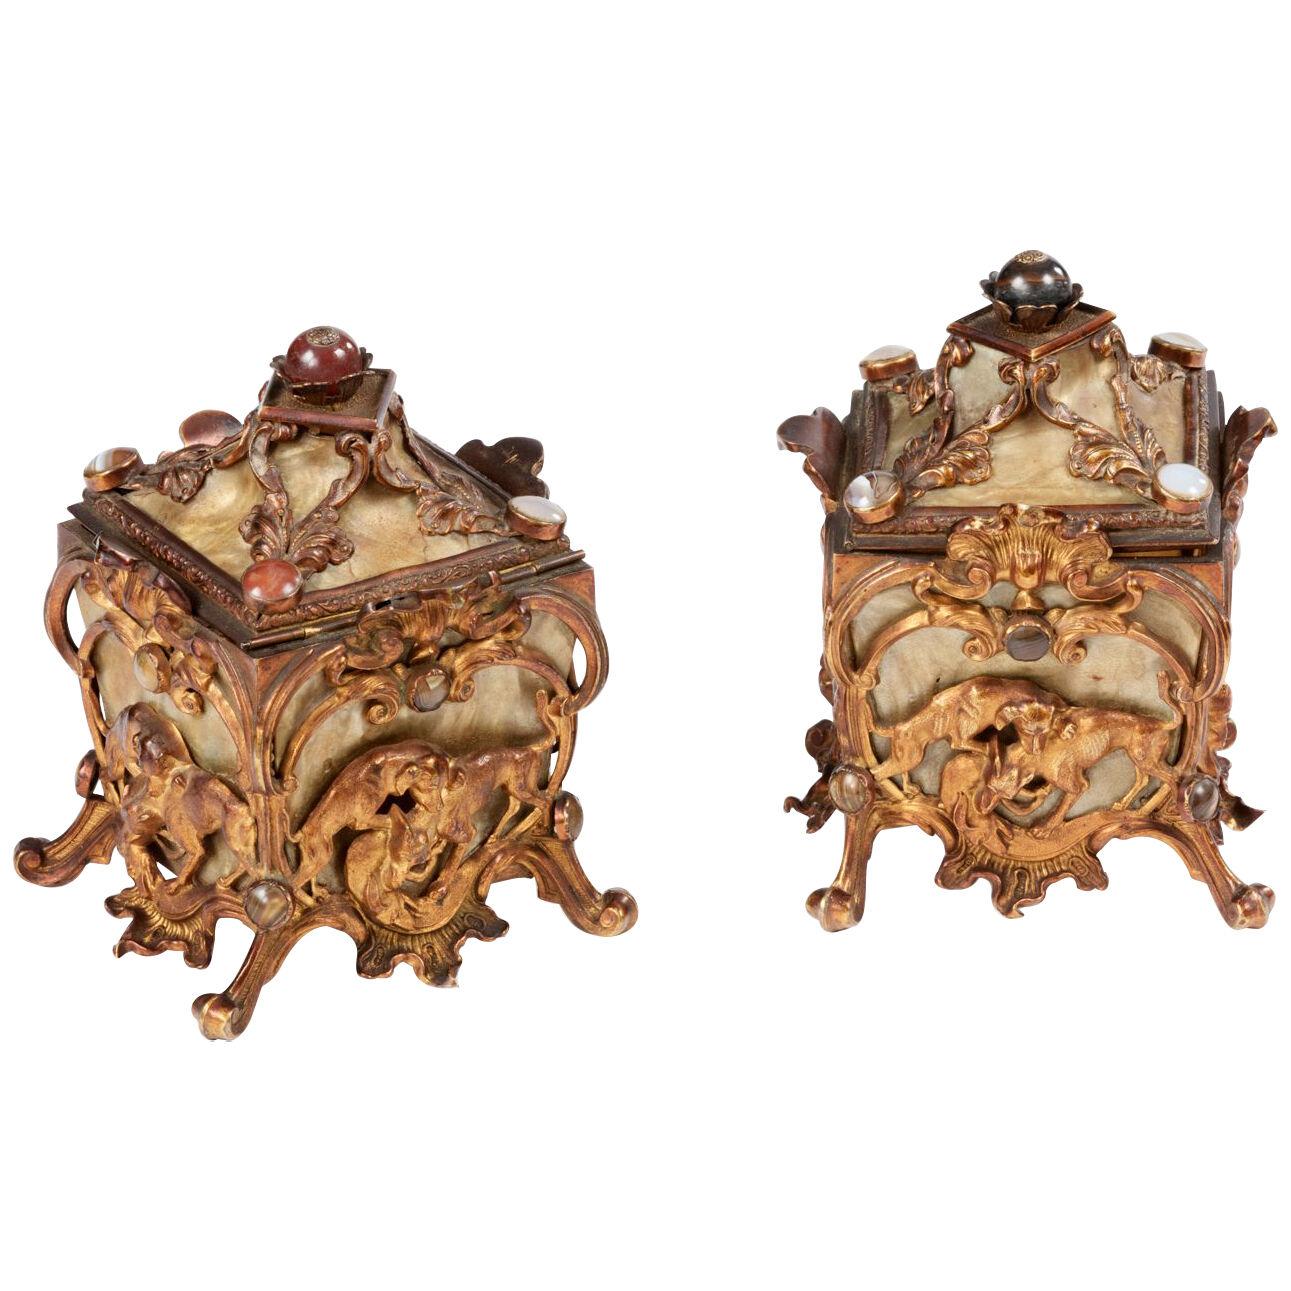 Pair of French Early 19th Century Jewellery Caskets